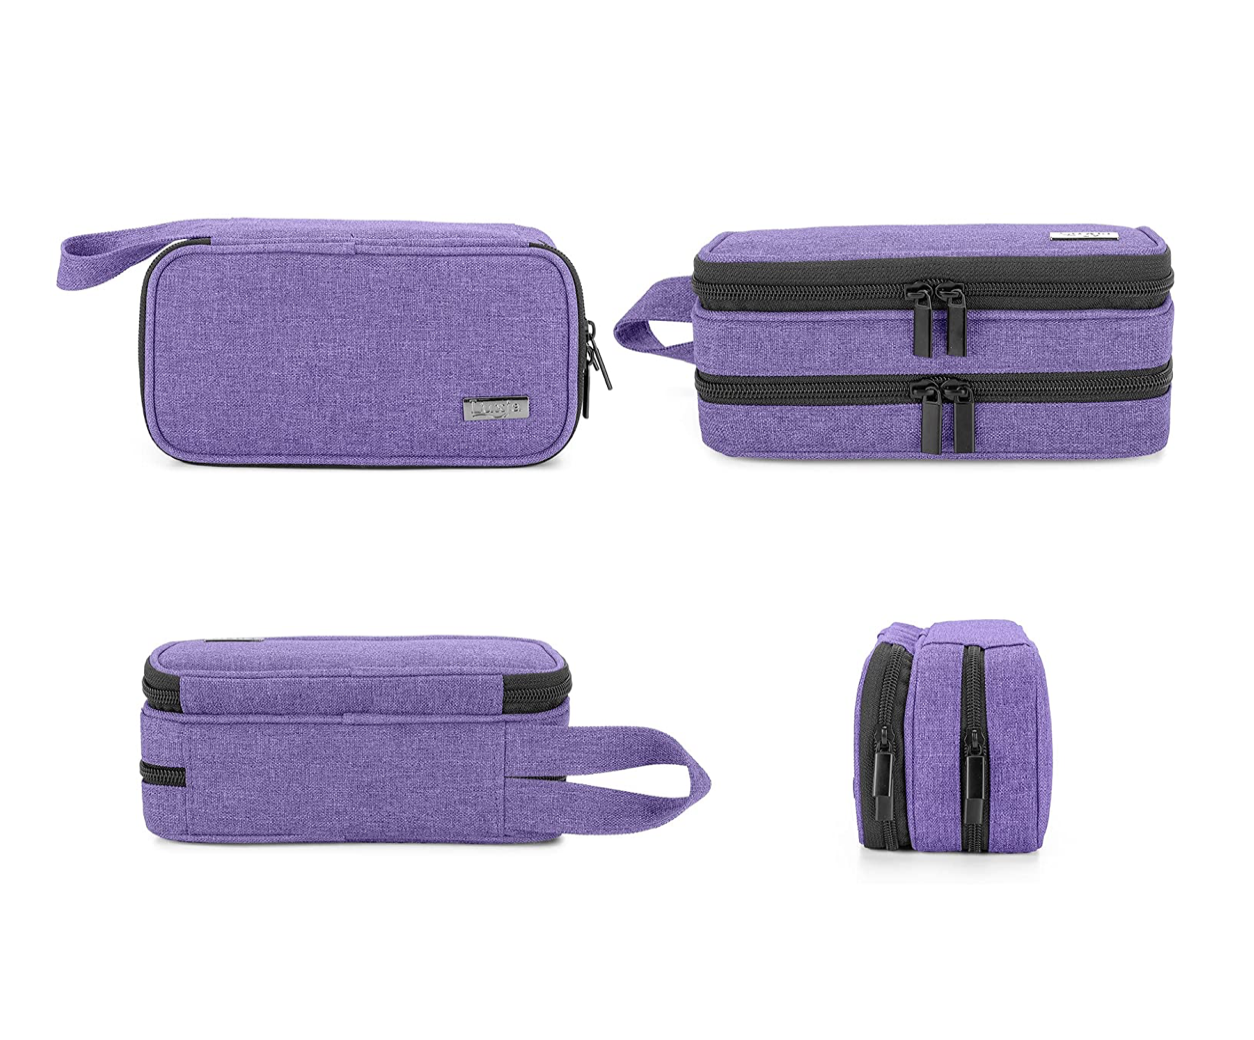 Essential Oil Carry Case (Holds 12 Bottles)